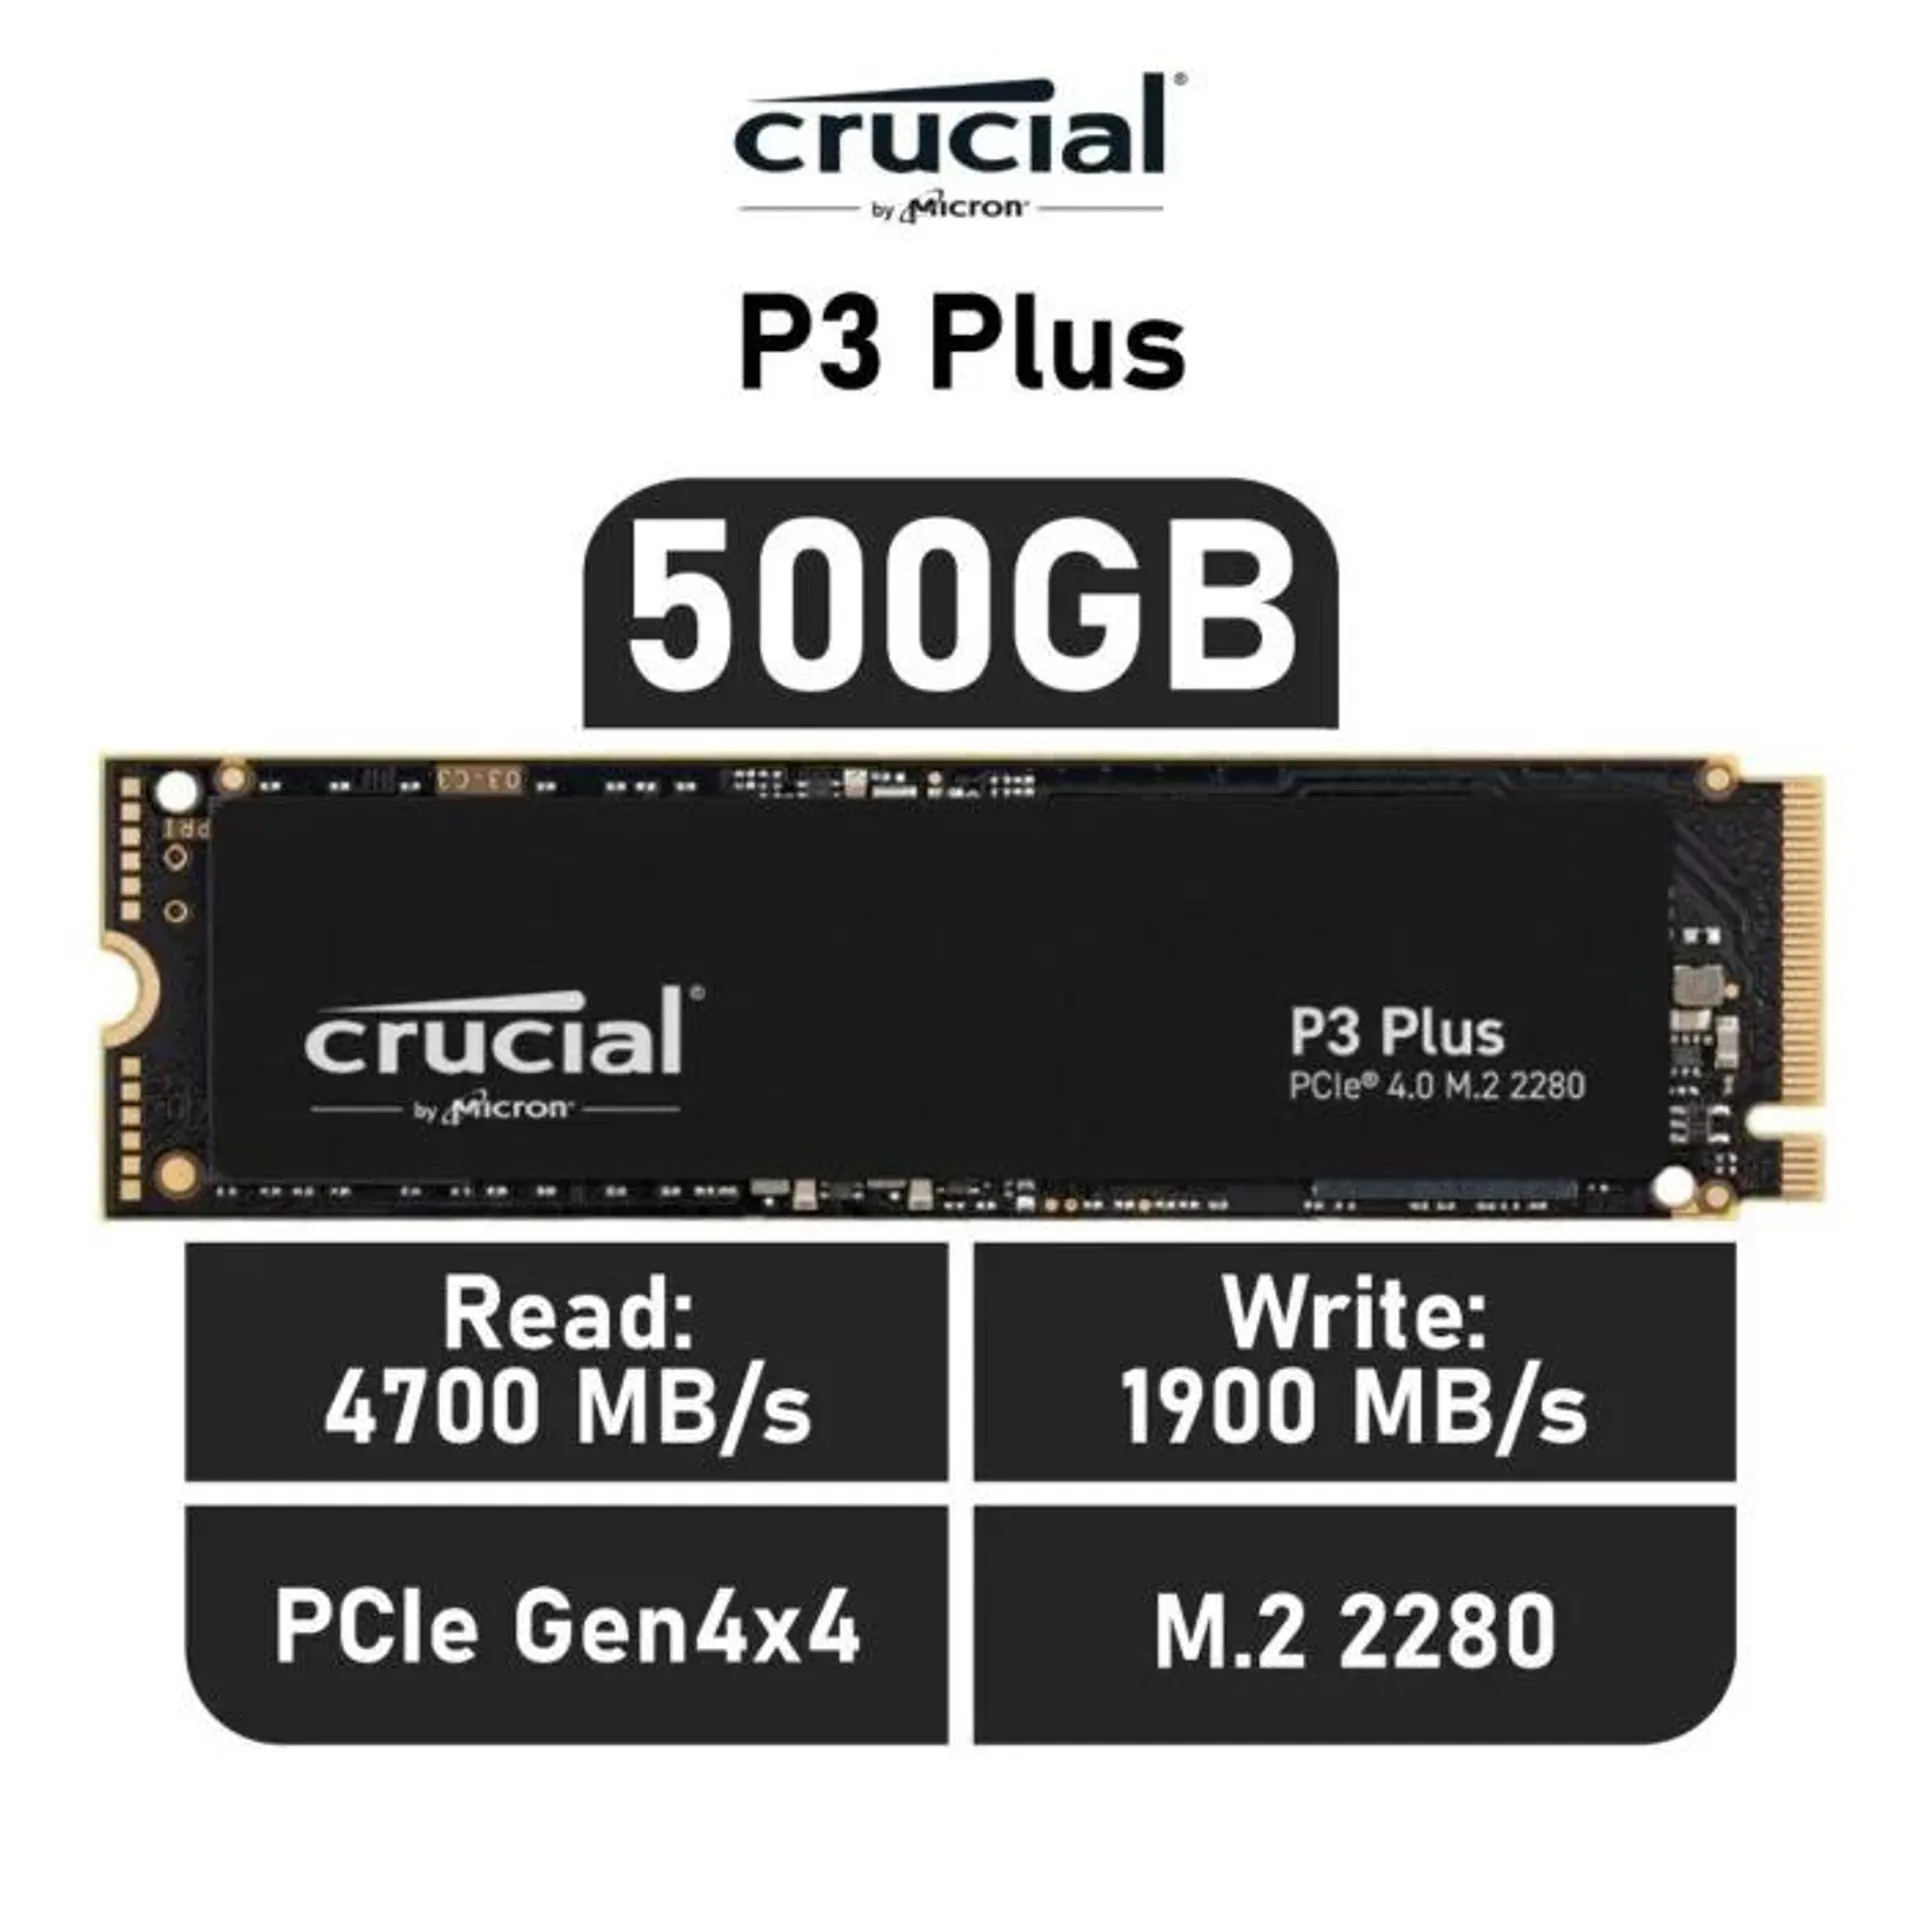 Crucial P3 Plus 500GB PCIe Gen4x4 CT500P3PSSD8 M.2 2280 Solid State Drive